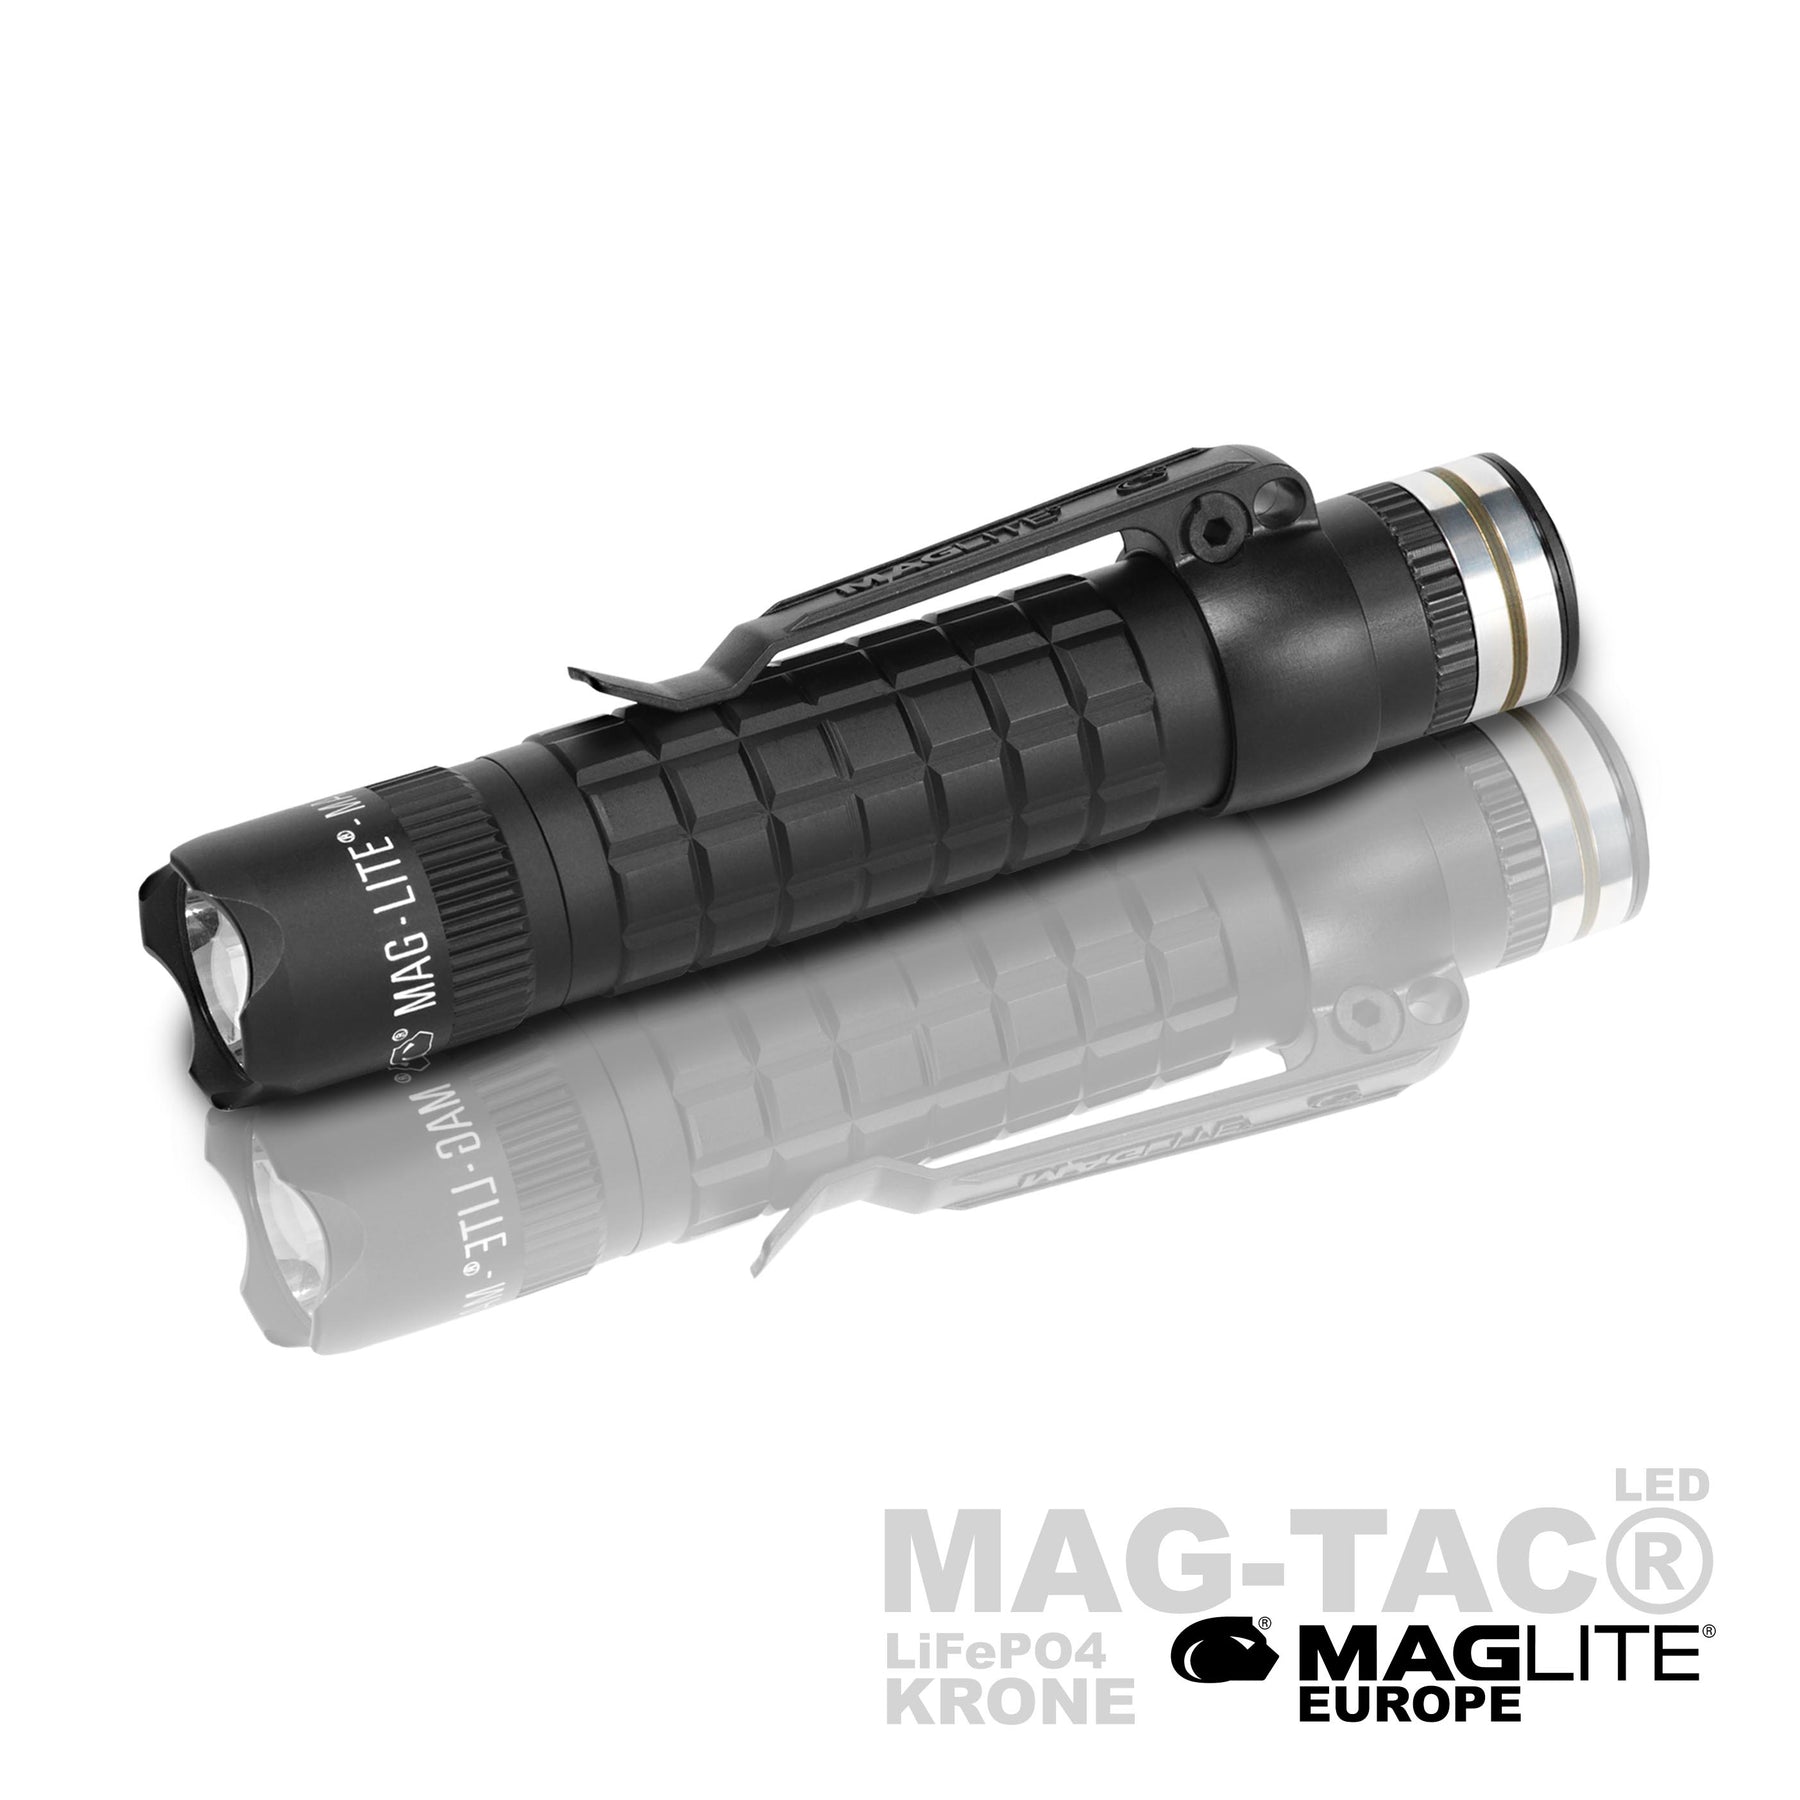 TRIO FIXE - ⬛Maglite Lampe Torche LED Rechargeable Ref: RL4019